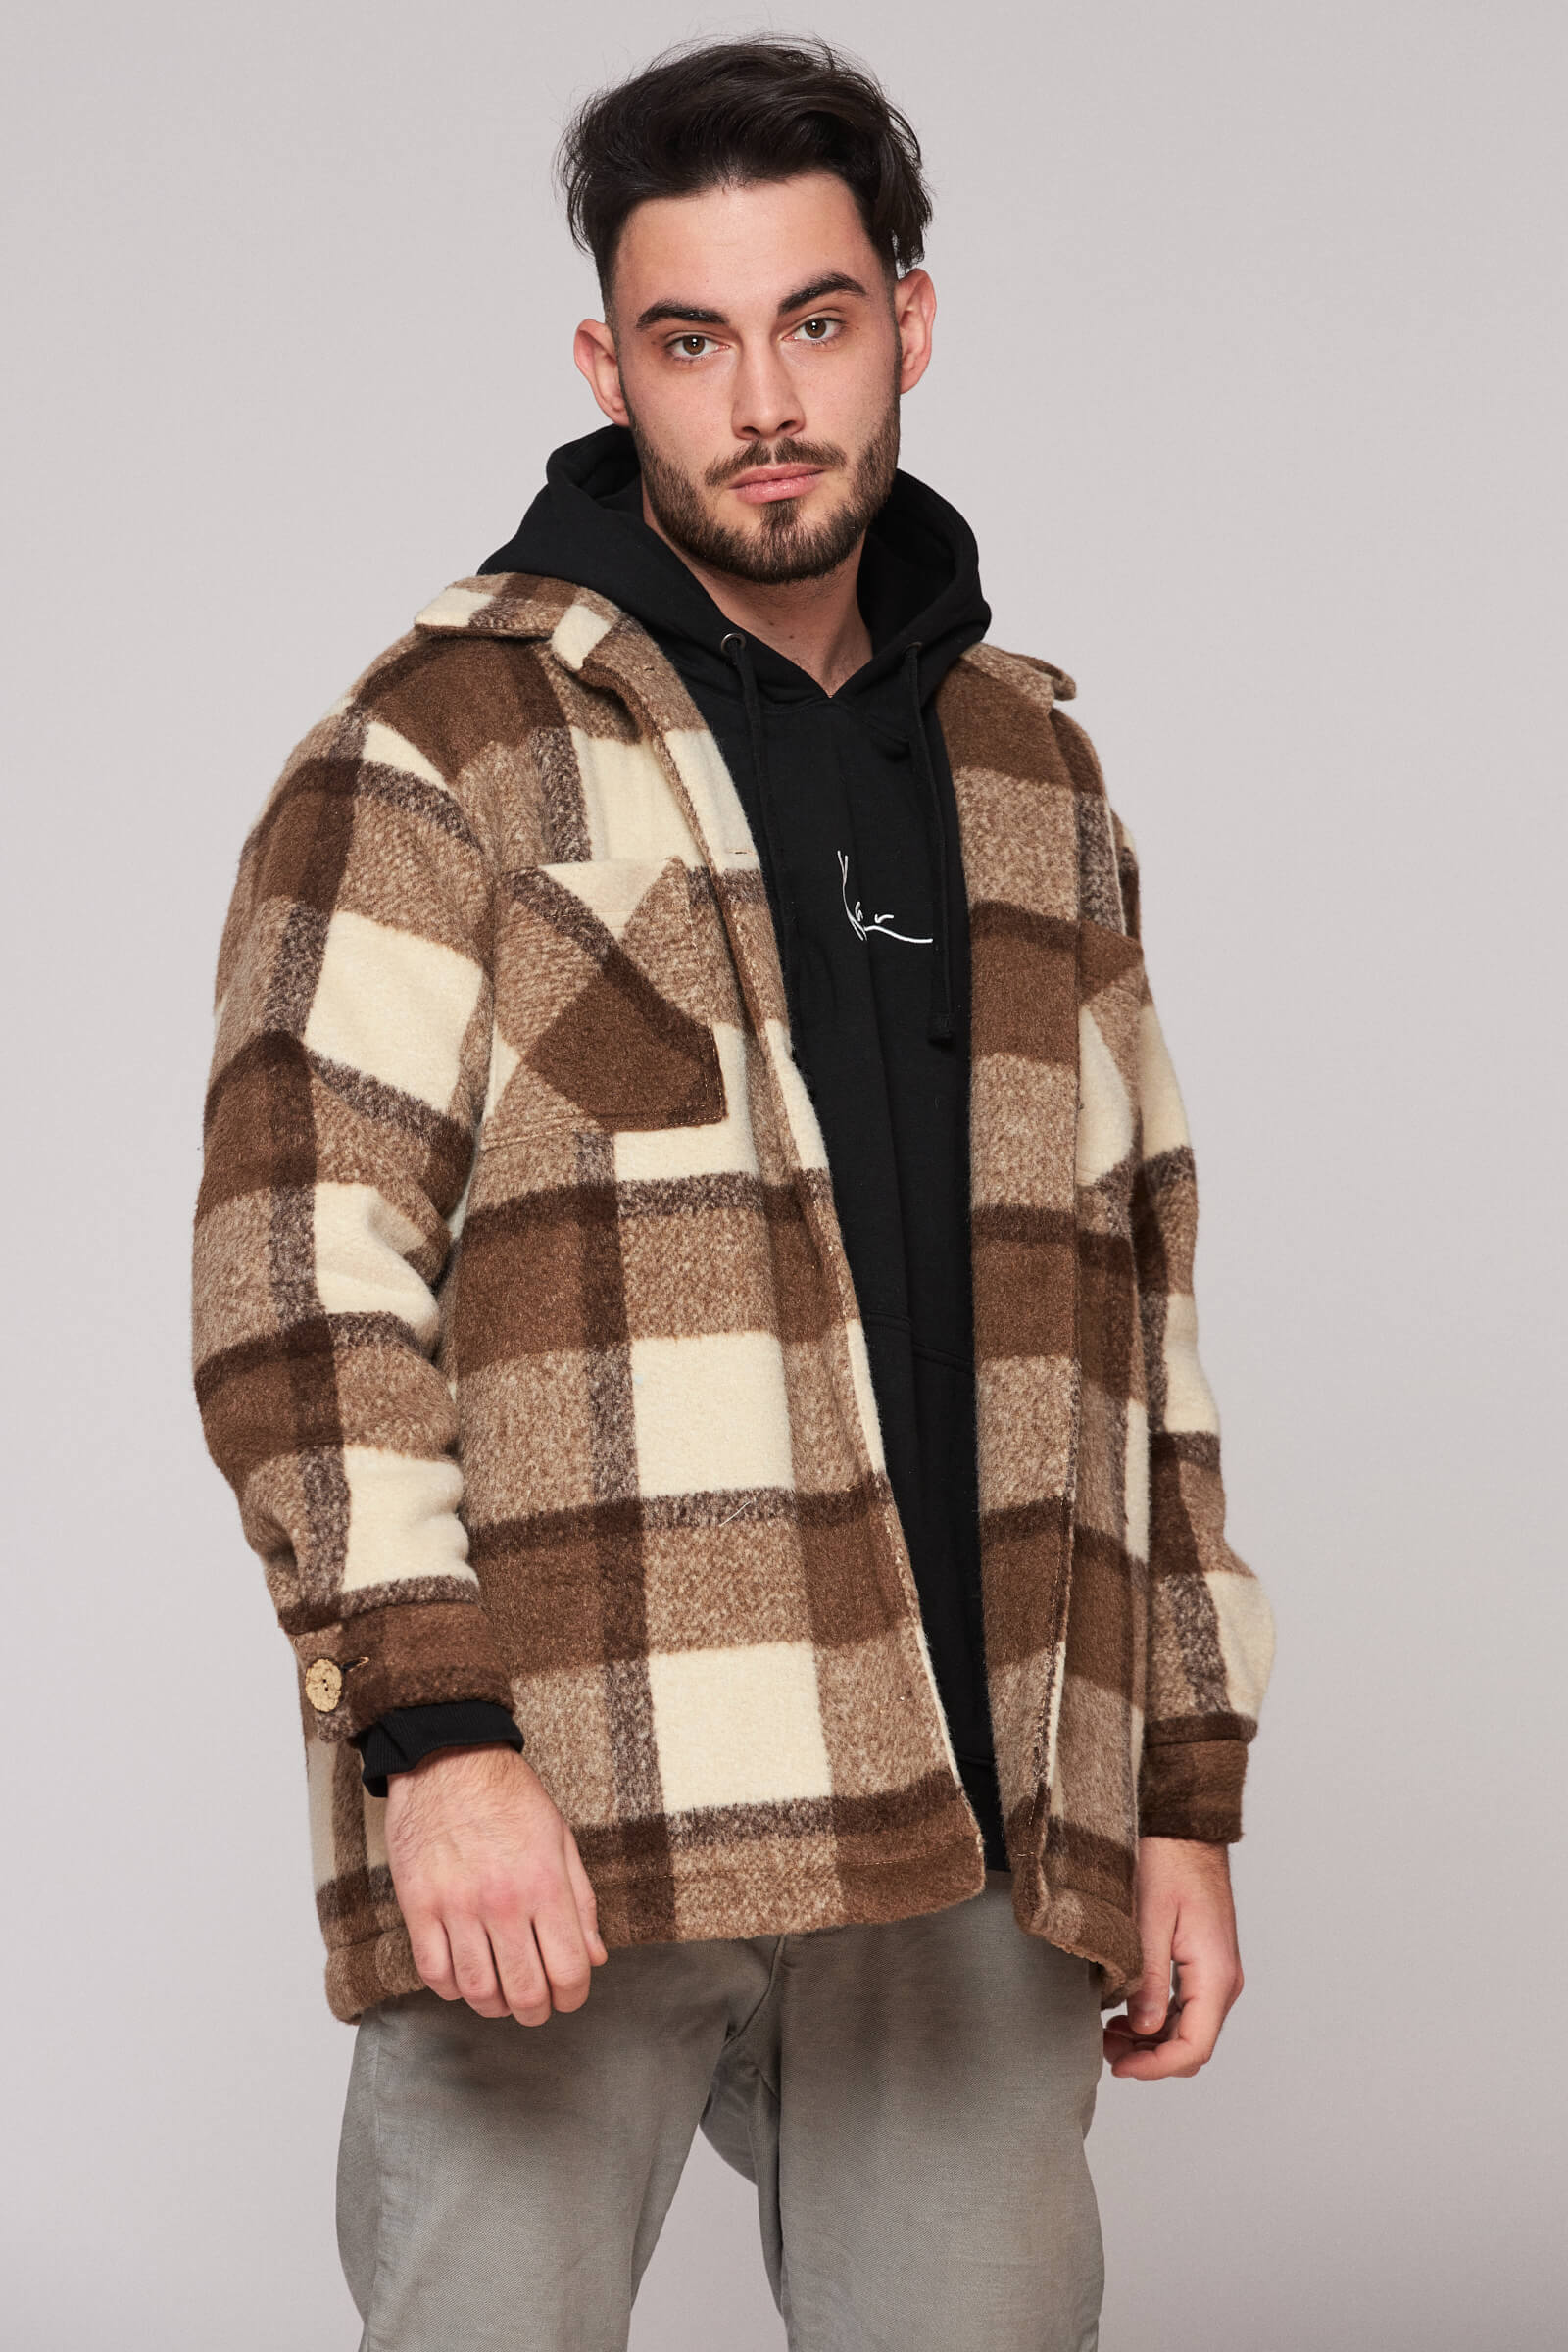 This season we decided to take things even more wild with our men aesthetics going full lumberjack. You can almost smell the crispy cold wind and hear the fire in tha back of a wooden cabin, can't you? Nothing says manly better than a well suited plaid jacket. Bring on the style hunting!